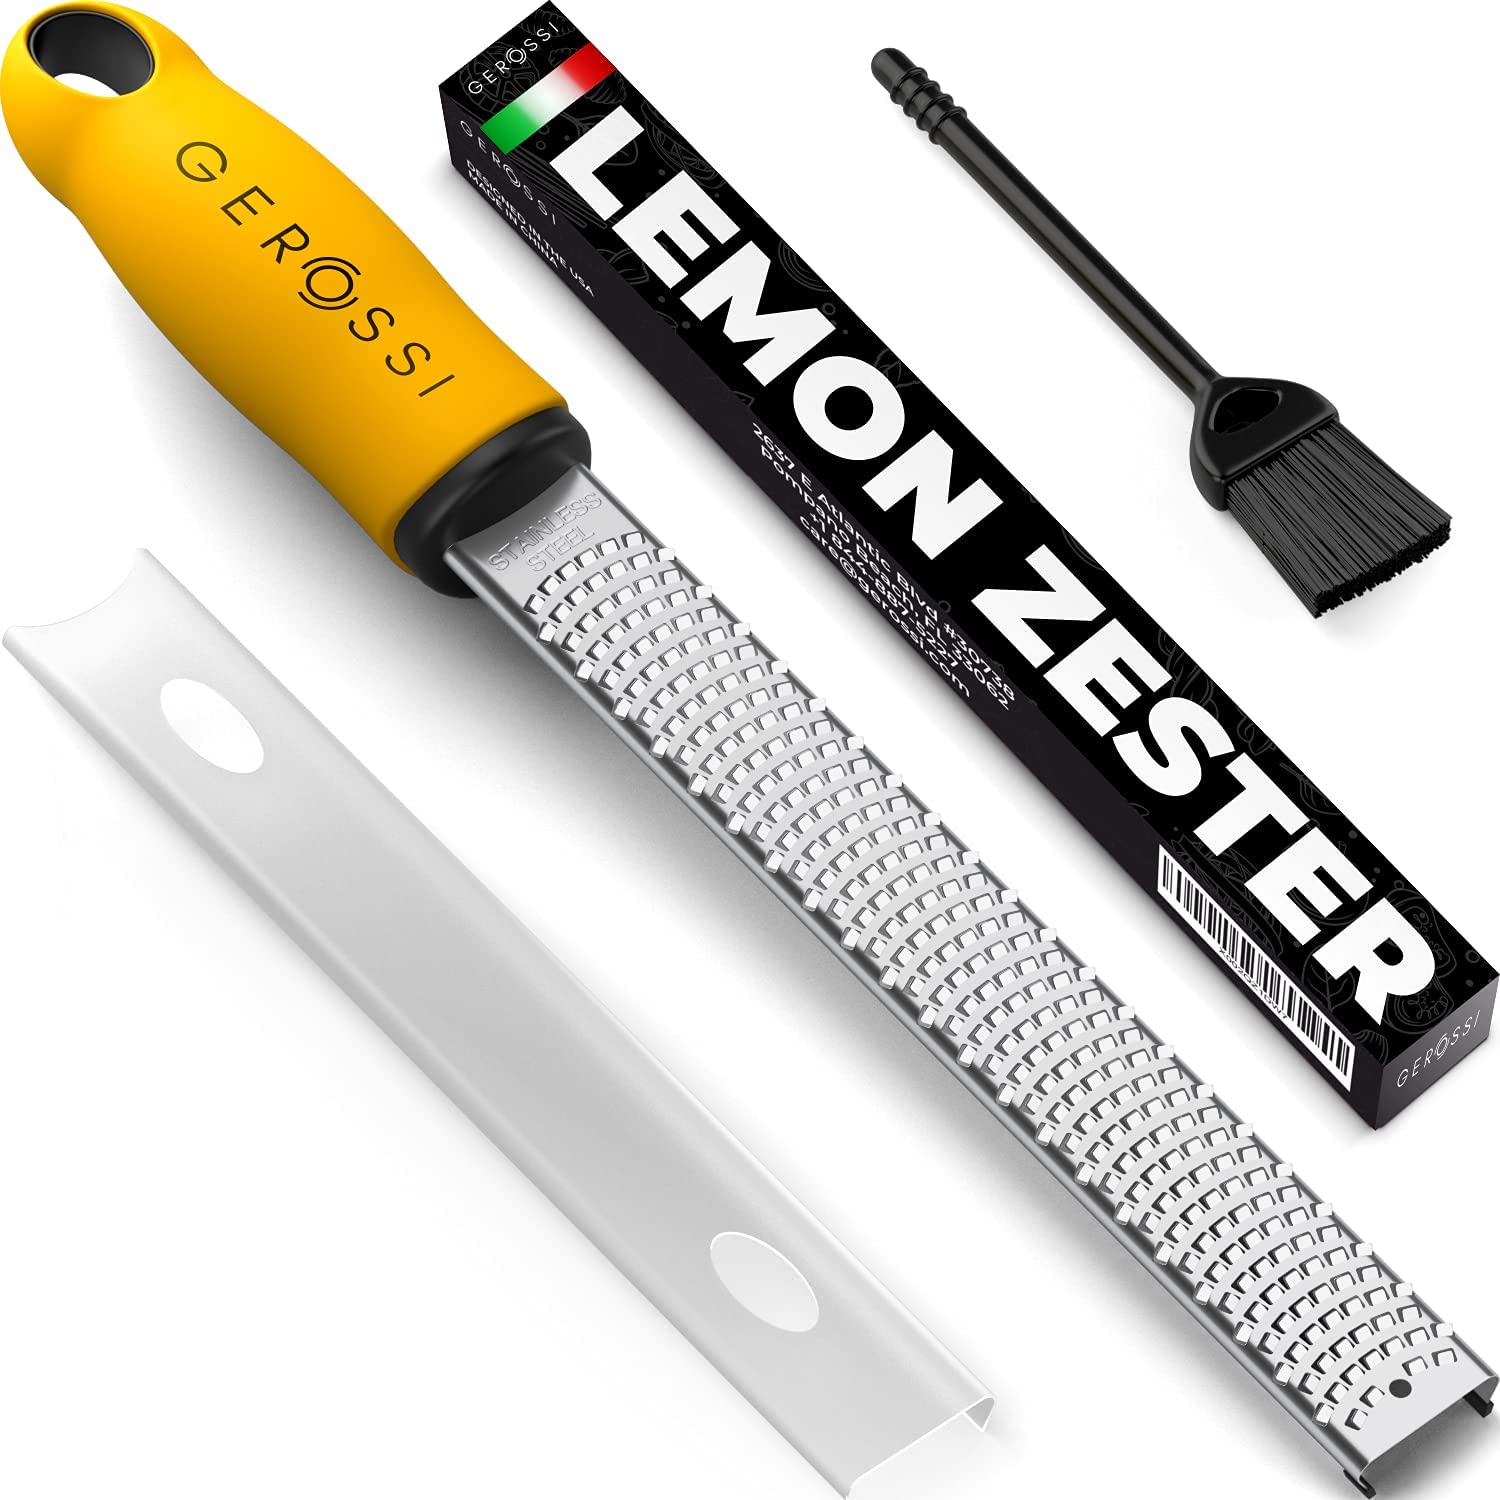 Professional Grade Stainless Steel Zester and Grater